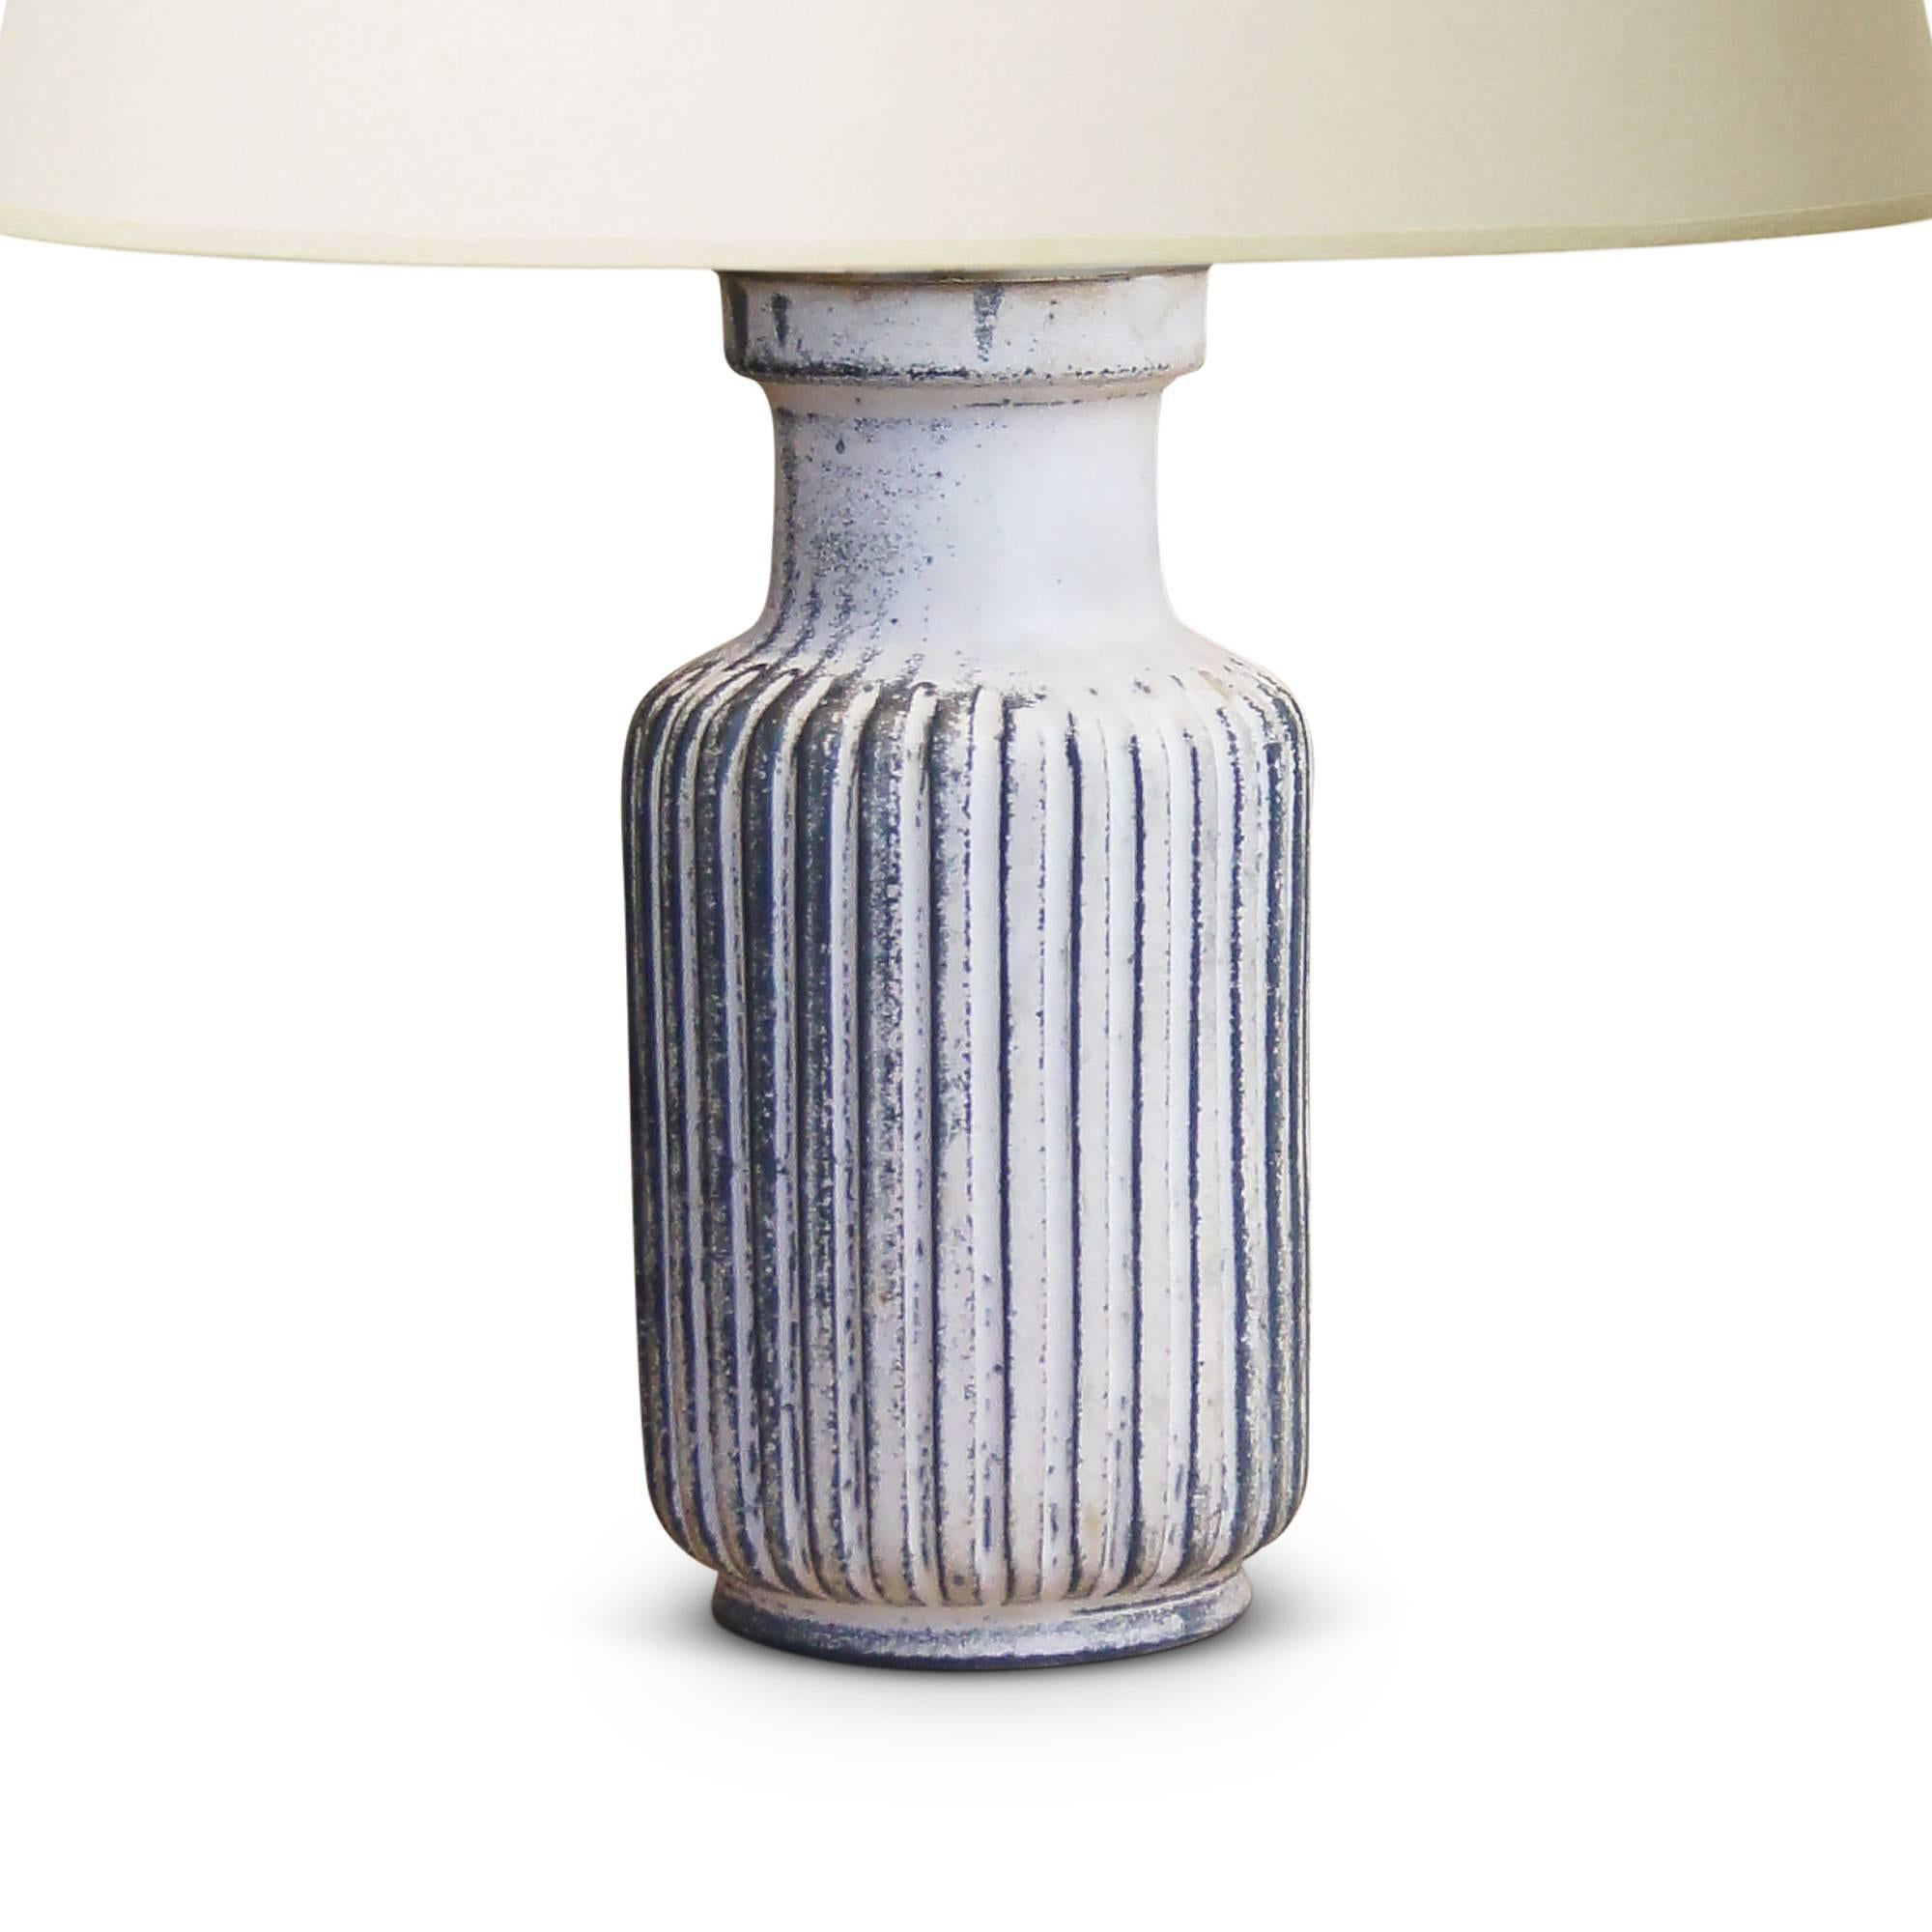 Table lamp by Svend Hammershøi (1873-1948) for Kähler Keramik, having an albarello / apothecary jar form with deep carved vertical flutes around its perimeter, in stoneware glazed in a rare rose-black variation of the white-black tin glaze developed